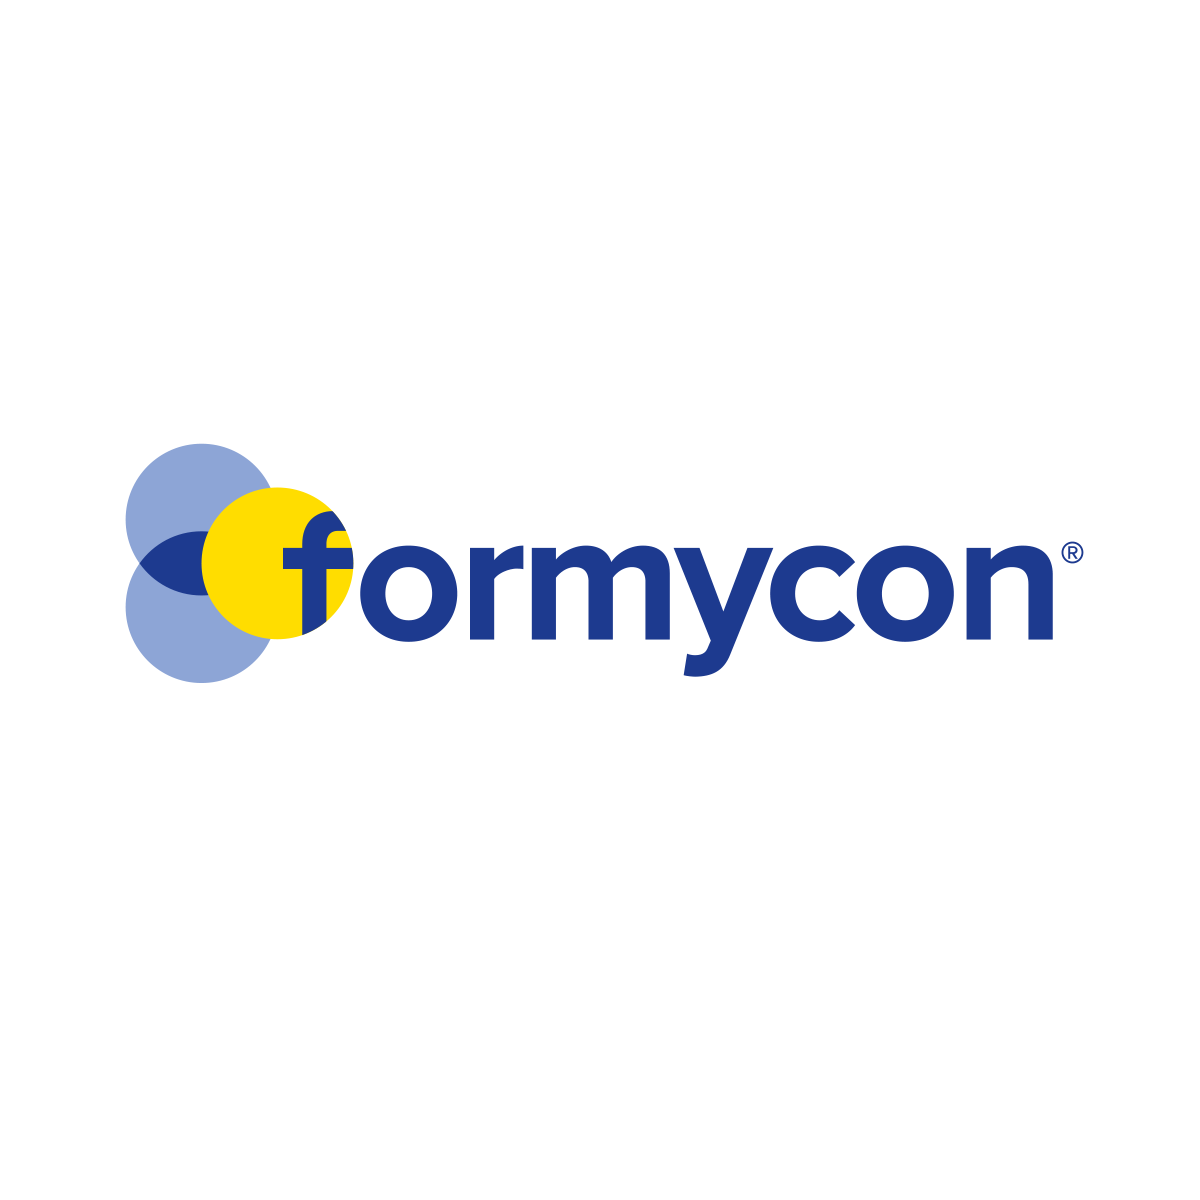 Formycon To Update on its Biosimilar Programs